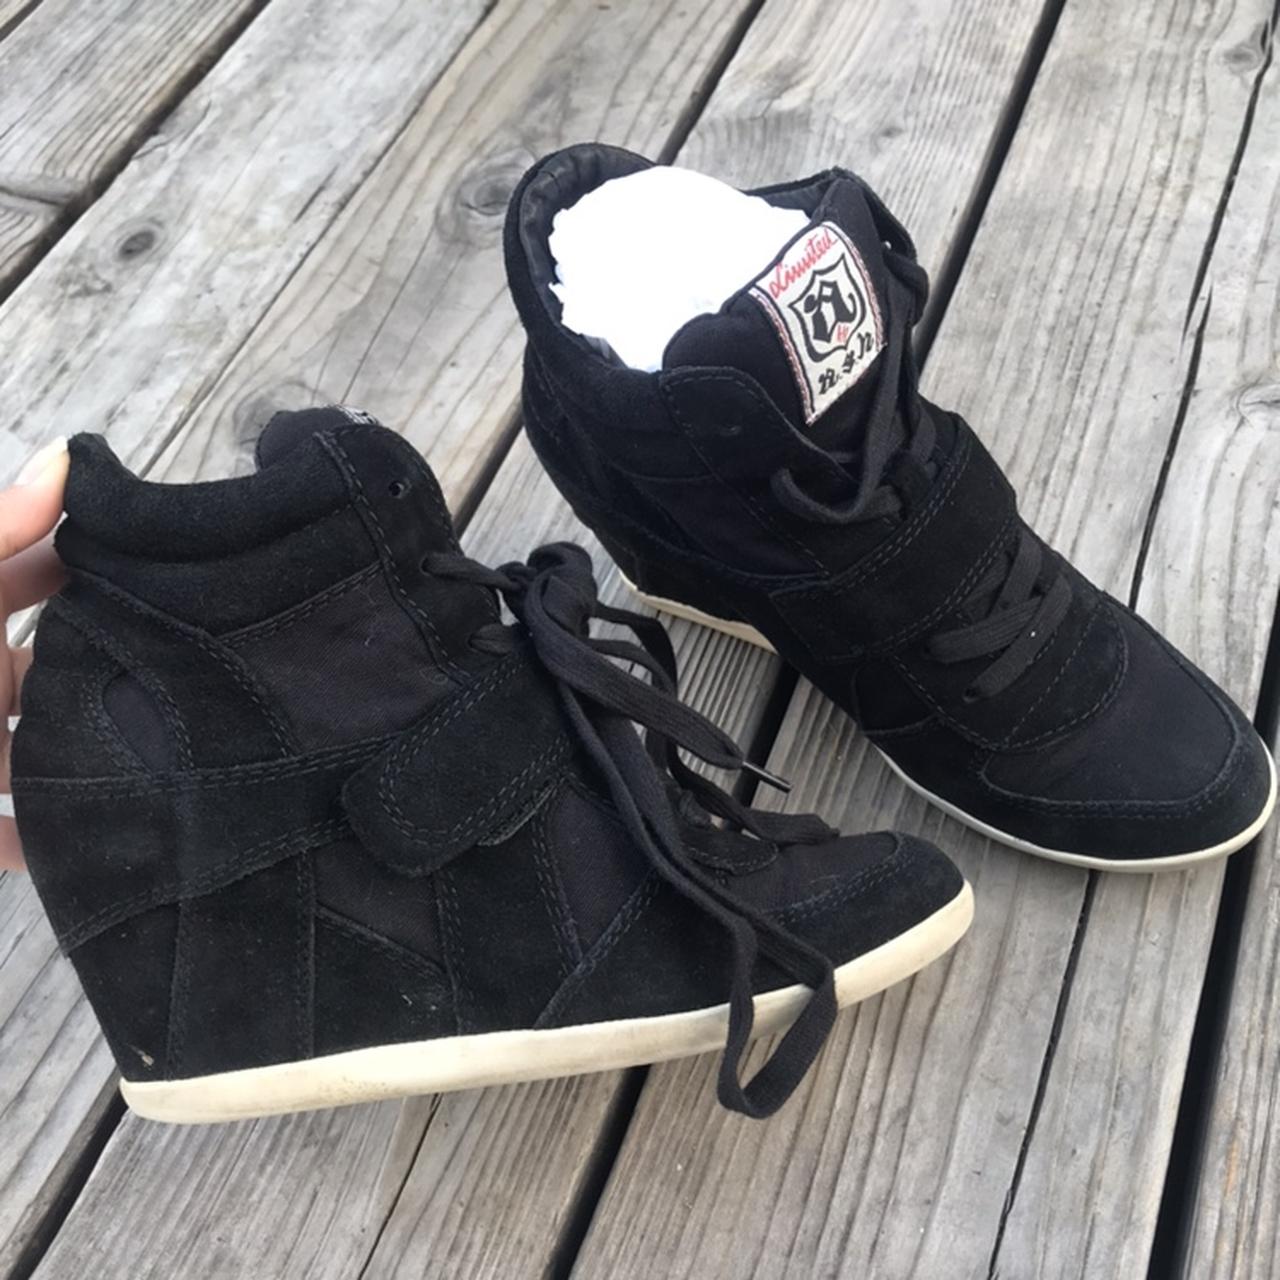 sollys Signal følelsesmæssig ASH Bowie wedge sneakers 🖤 size: 38 EU which is a... - Depop